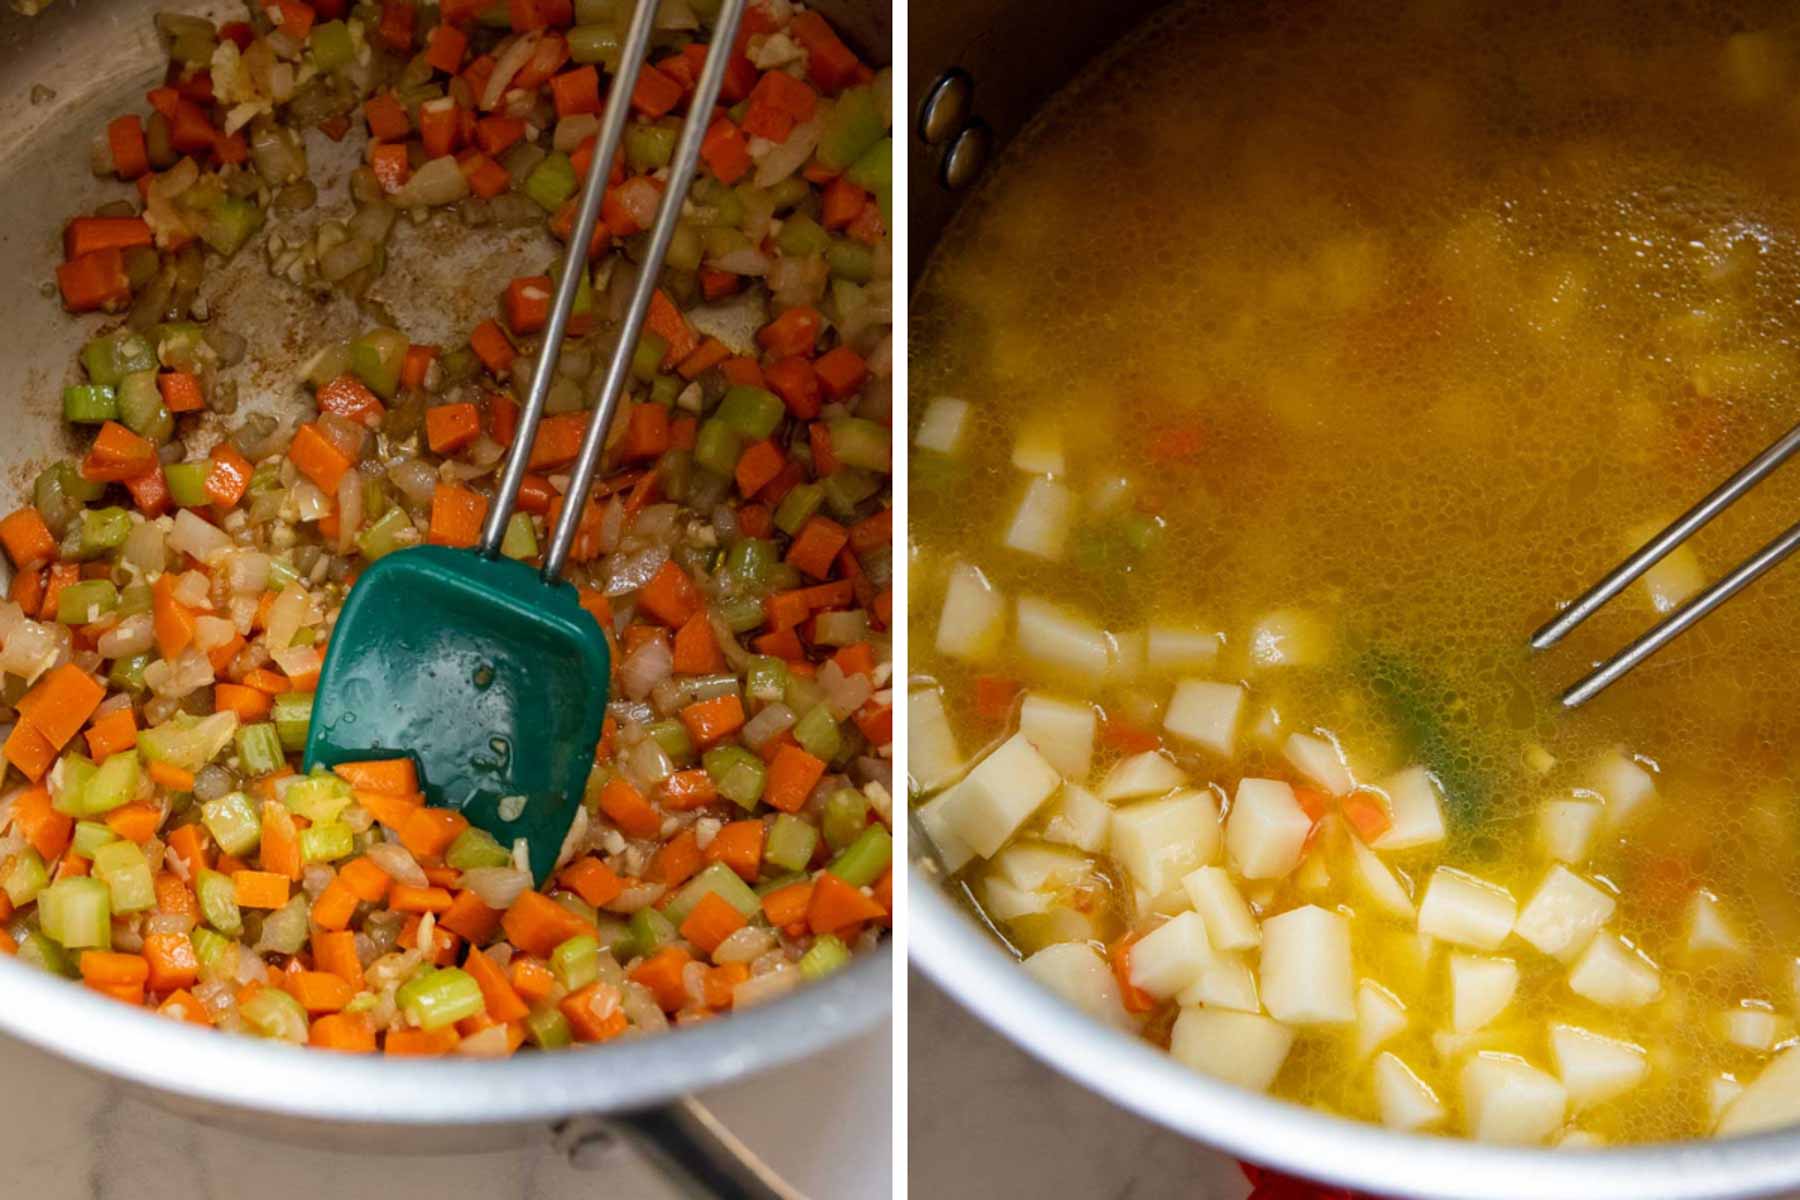 images showing how to make gluten-free potato soup.